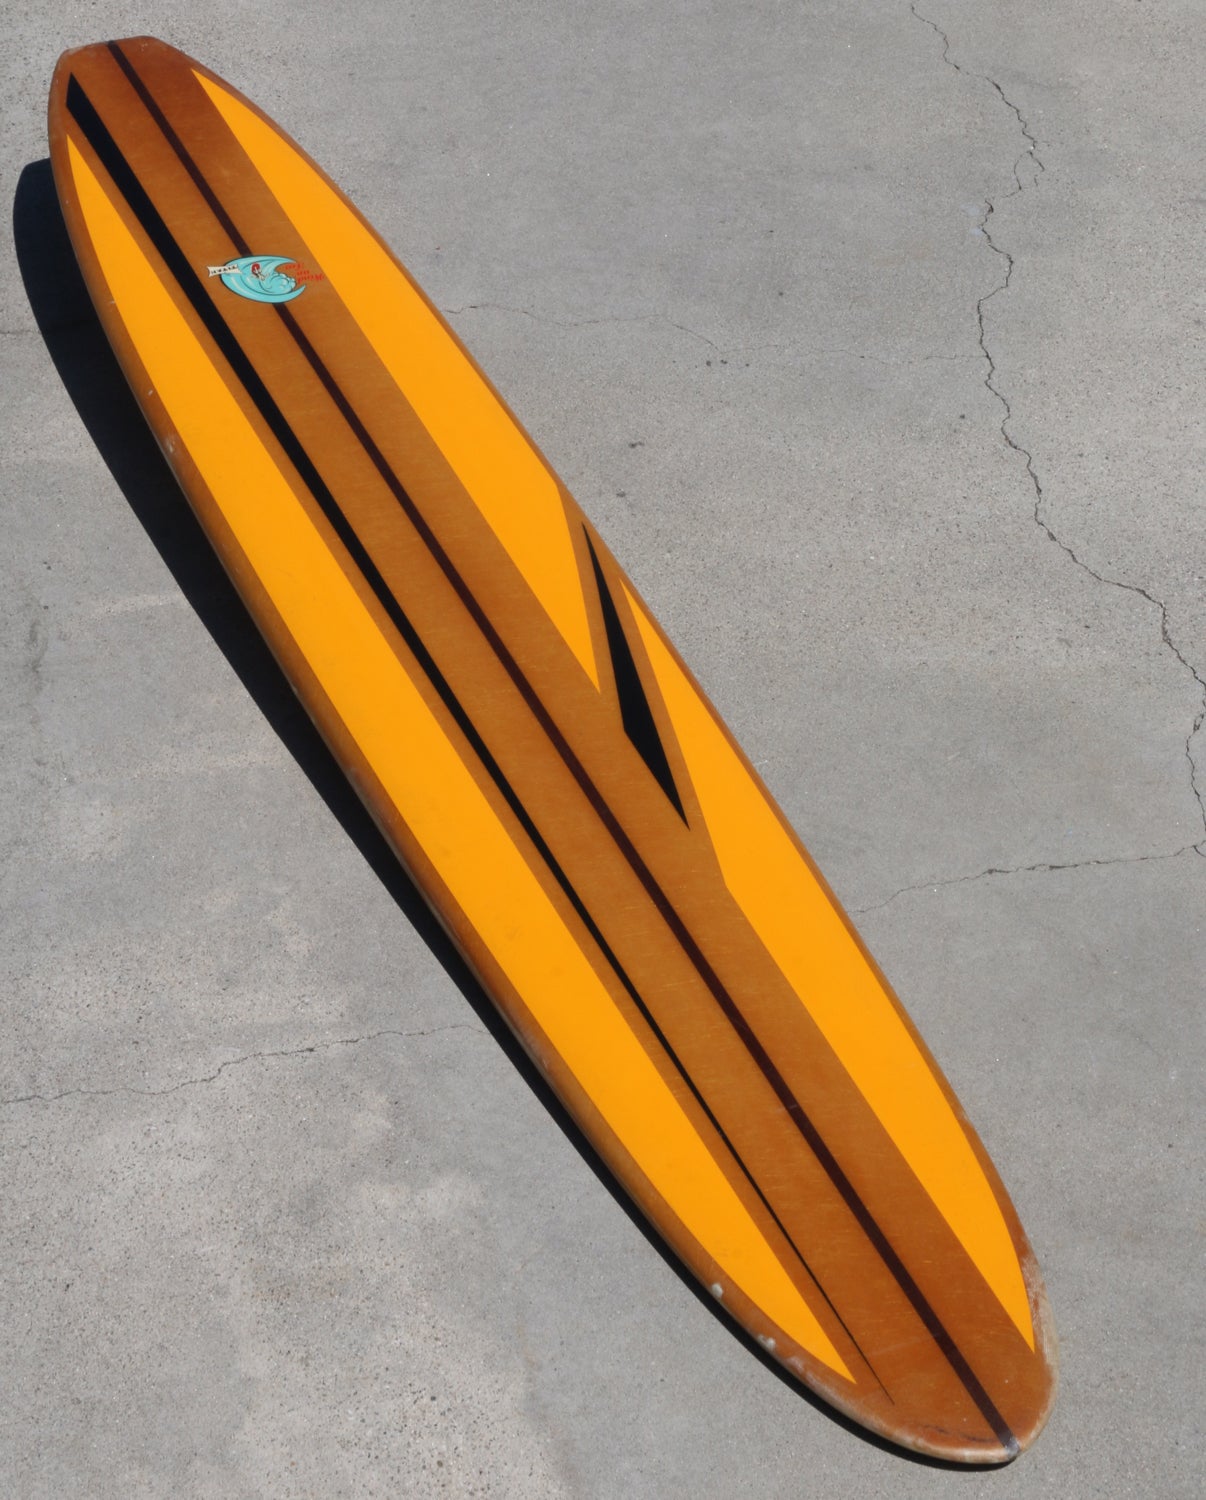 Gold Yellow Striped Titan Longboard Surfboard, All Original Circa 1960s
Vivid goldenrod yellow, accented by vertical and off-set black stripes.  Add to that the cleanest, most vibrant and vivid logo.  Great original condition. The sum of these is